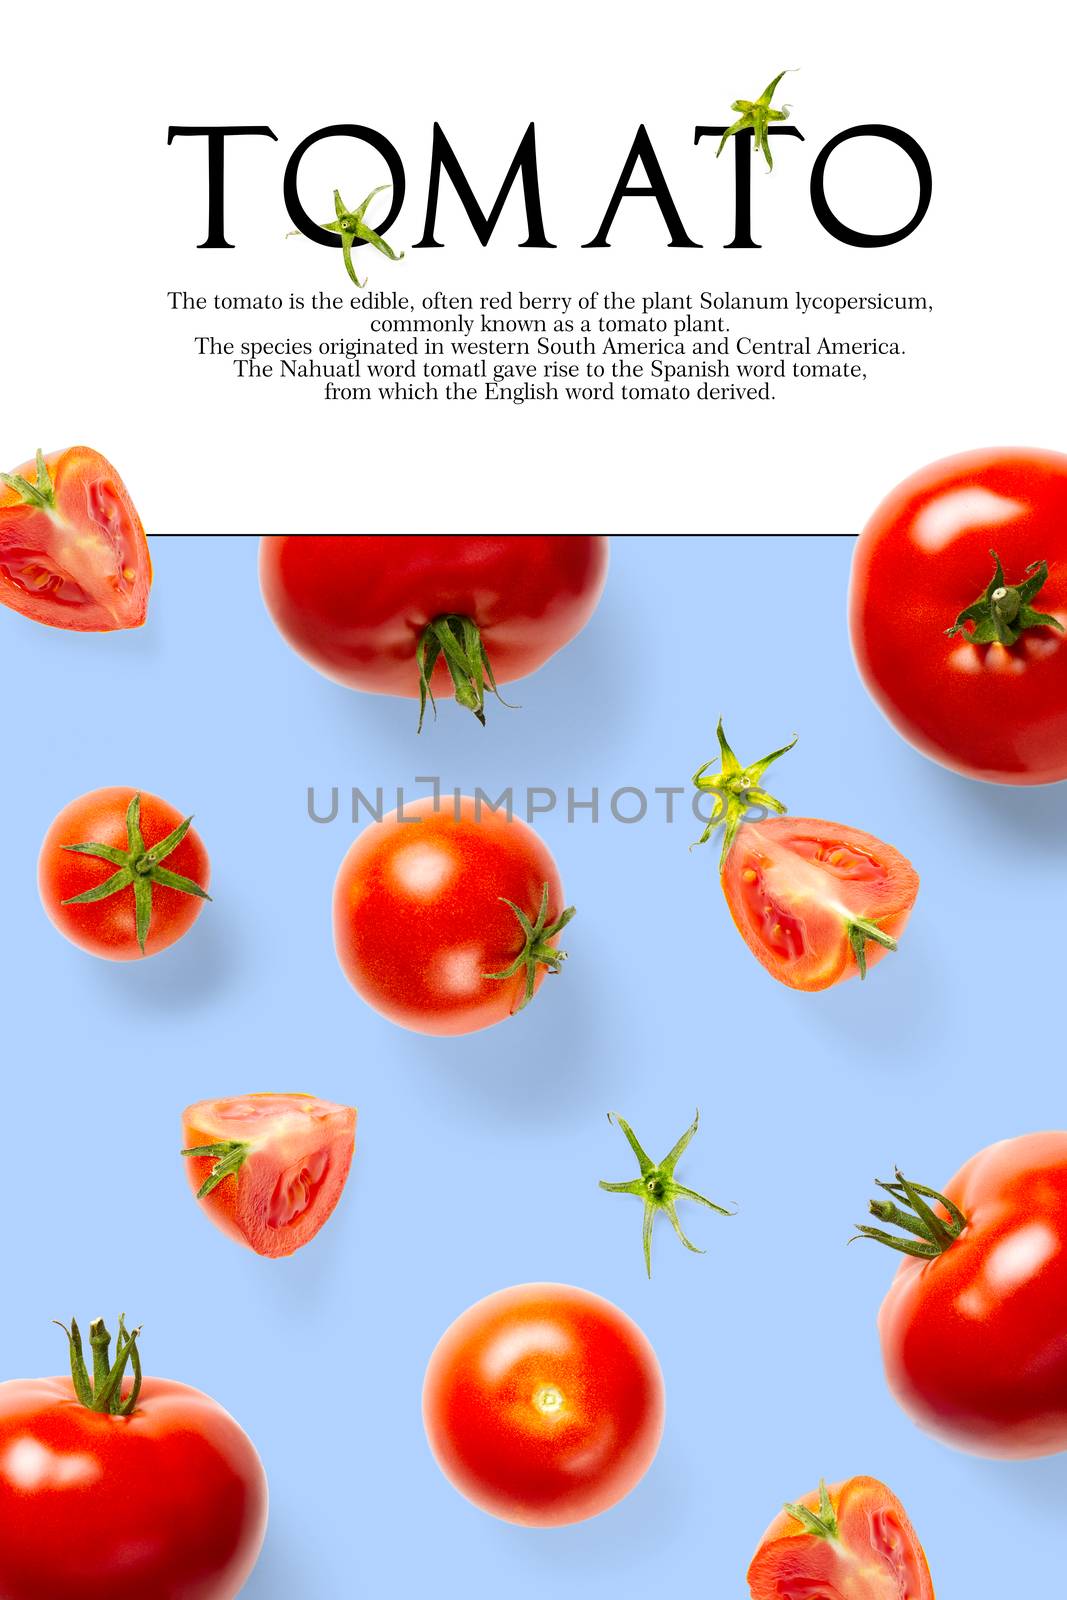 Creative layout made of tomato on the blue background. Creative flat lay set of tomatoes with simple text on white background, copy space. tomato theme decoration design or vegetarianism concept.